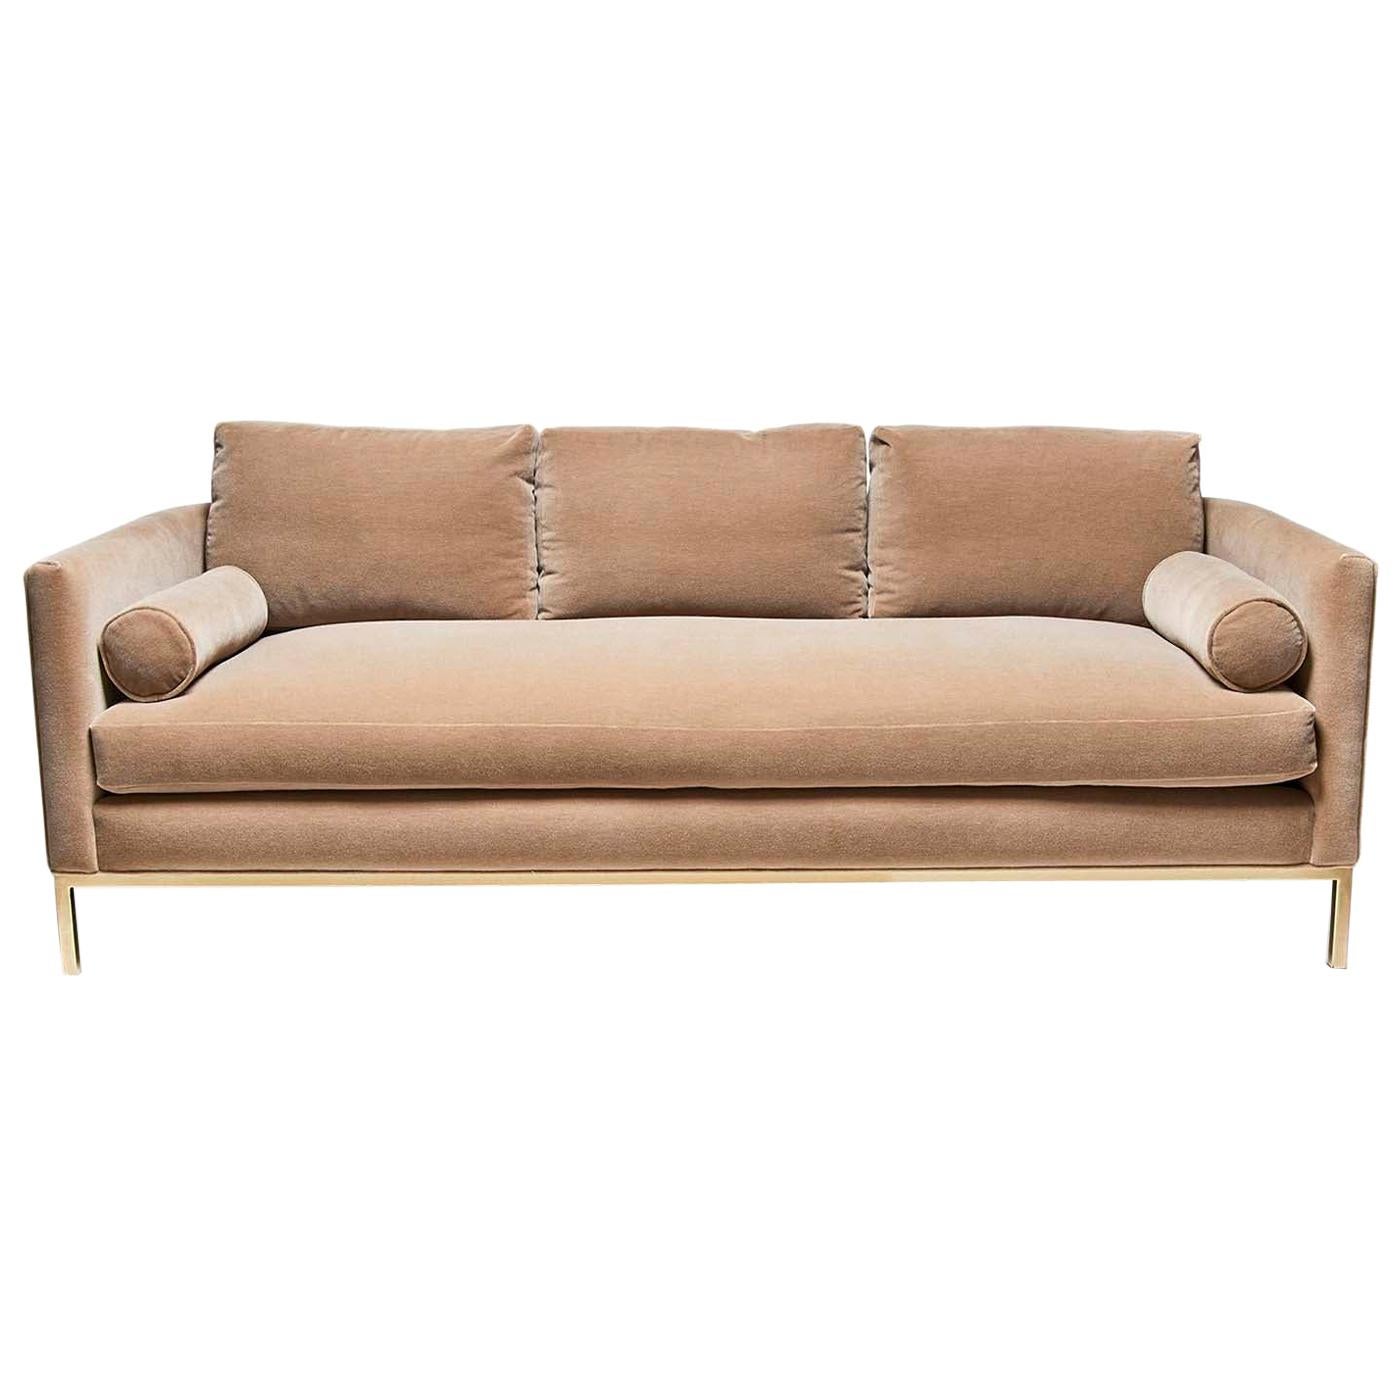 Mohair and Brass Curved Back Sofa by Lawson-Fenning